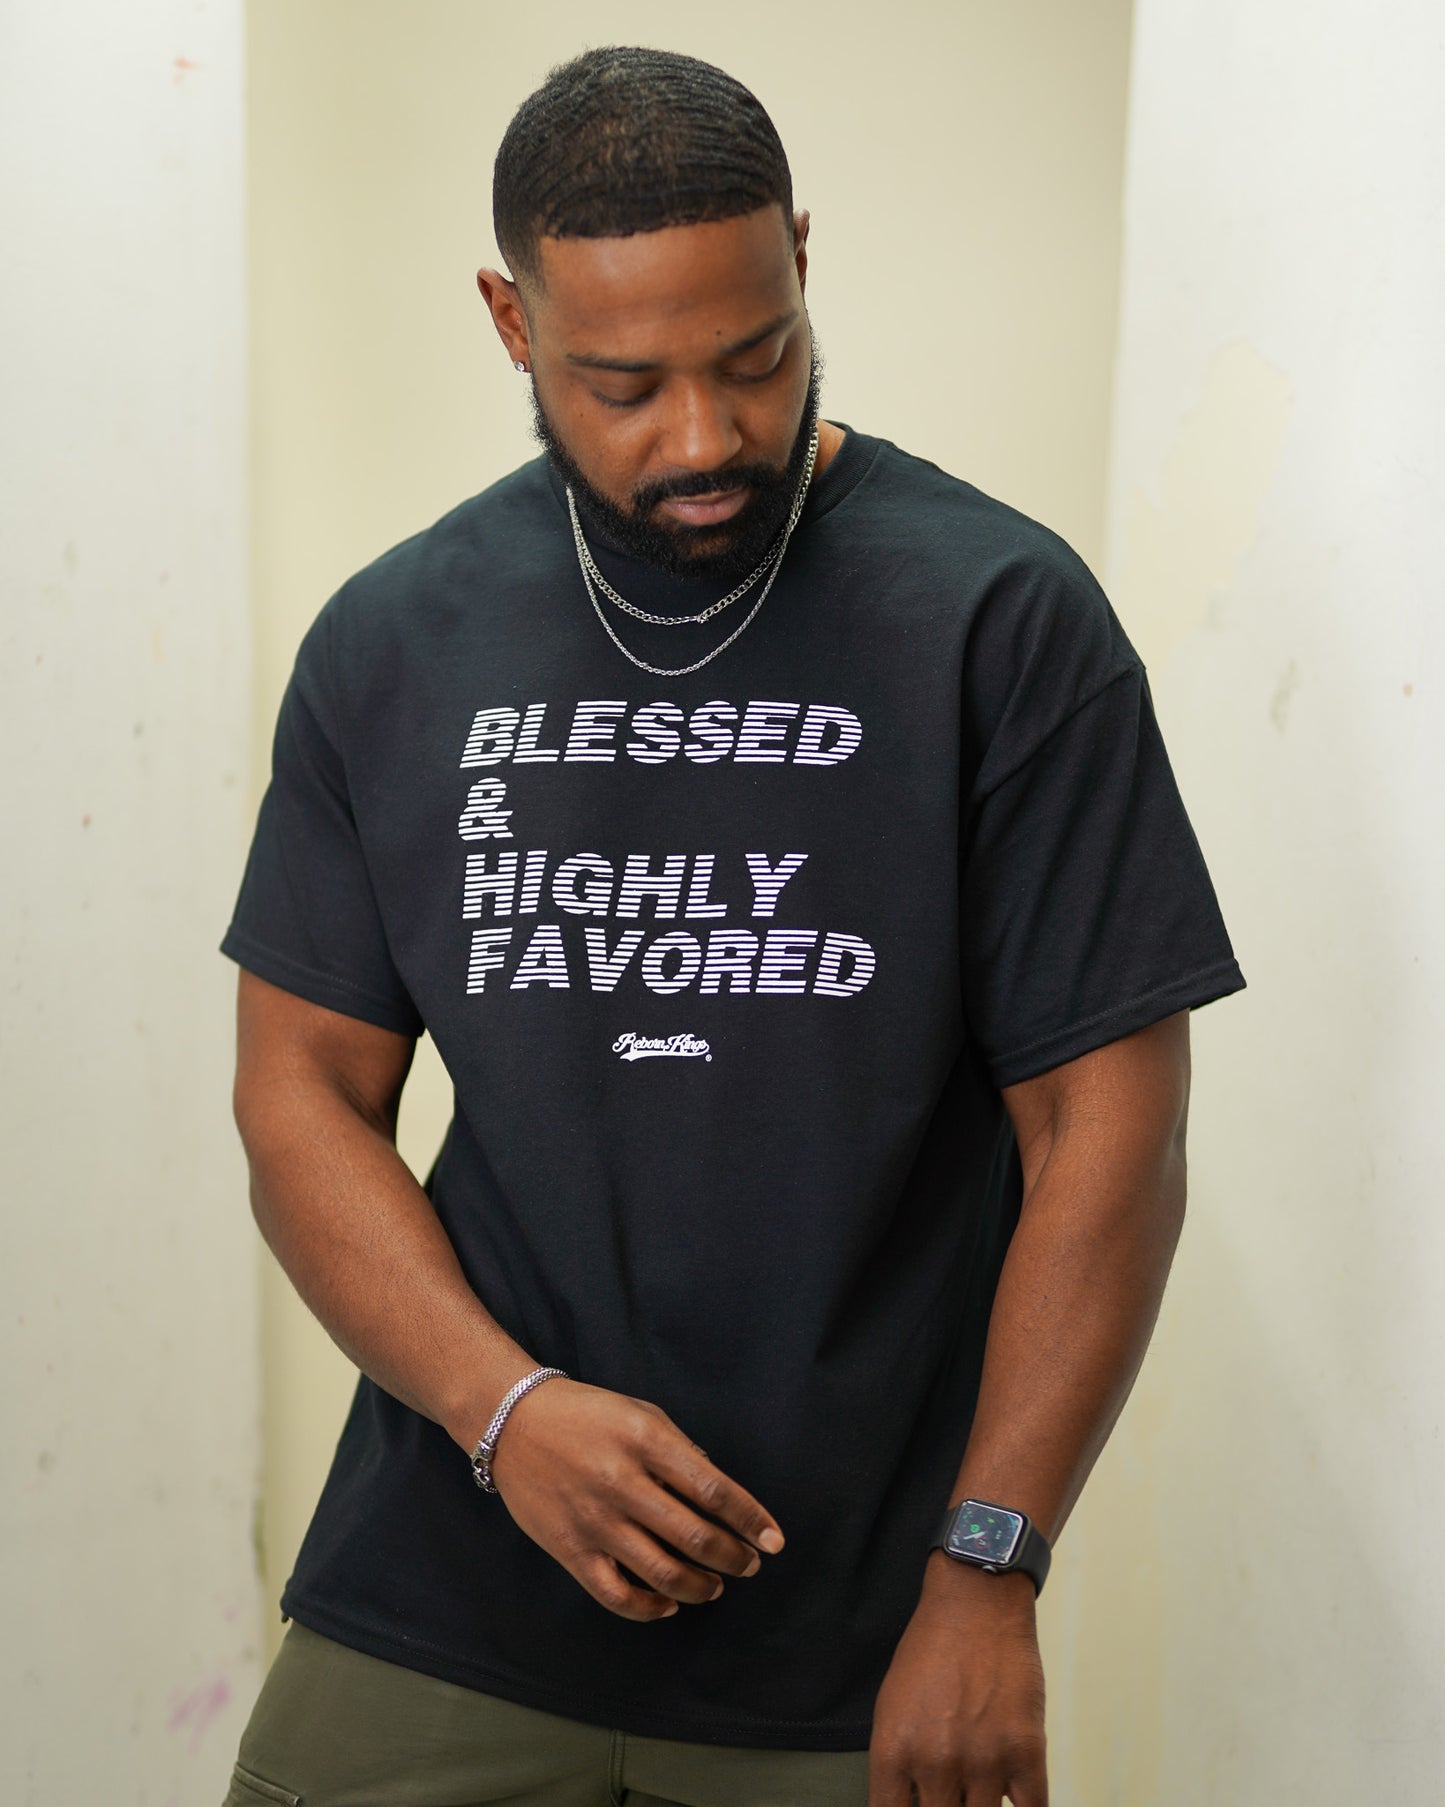 Blessed & Highly Favored Tee in Black